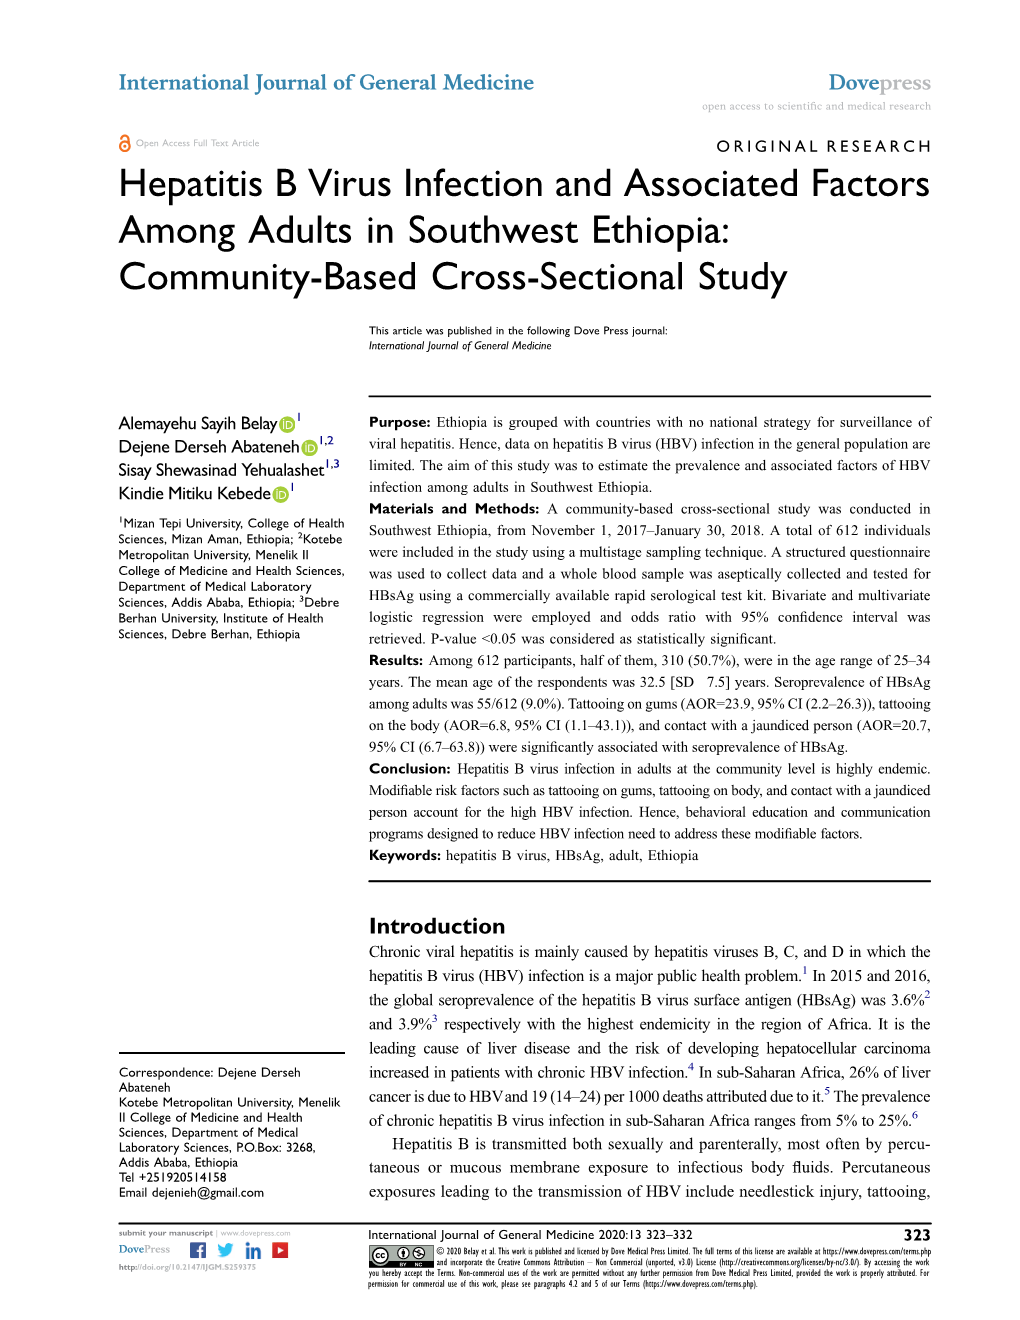 Hepatitis B Virus Infection and Associated Factors Among Adults in Southwest Ethiopia: Community-Based Cross-Sectional Study